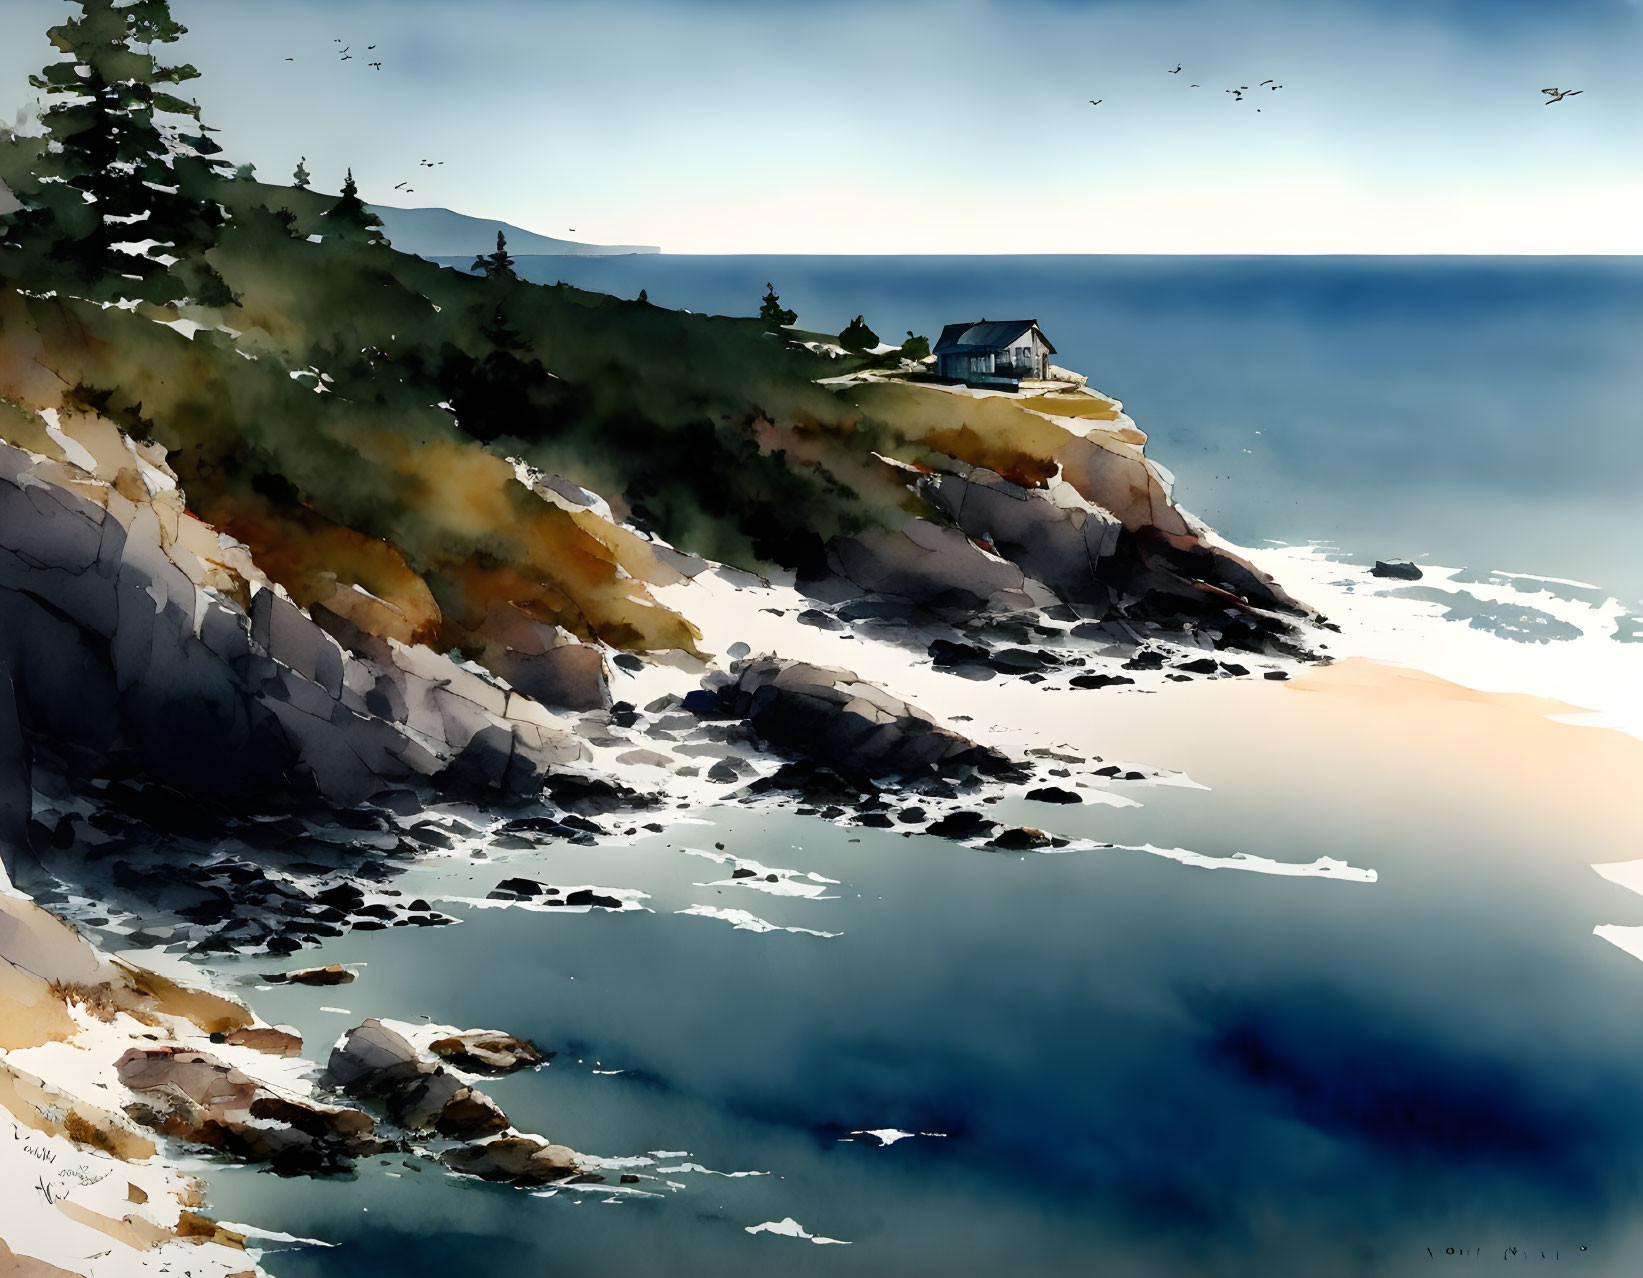 Coastal watercolor painting: house on cliff, sunlight on water, birds in sky